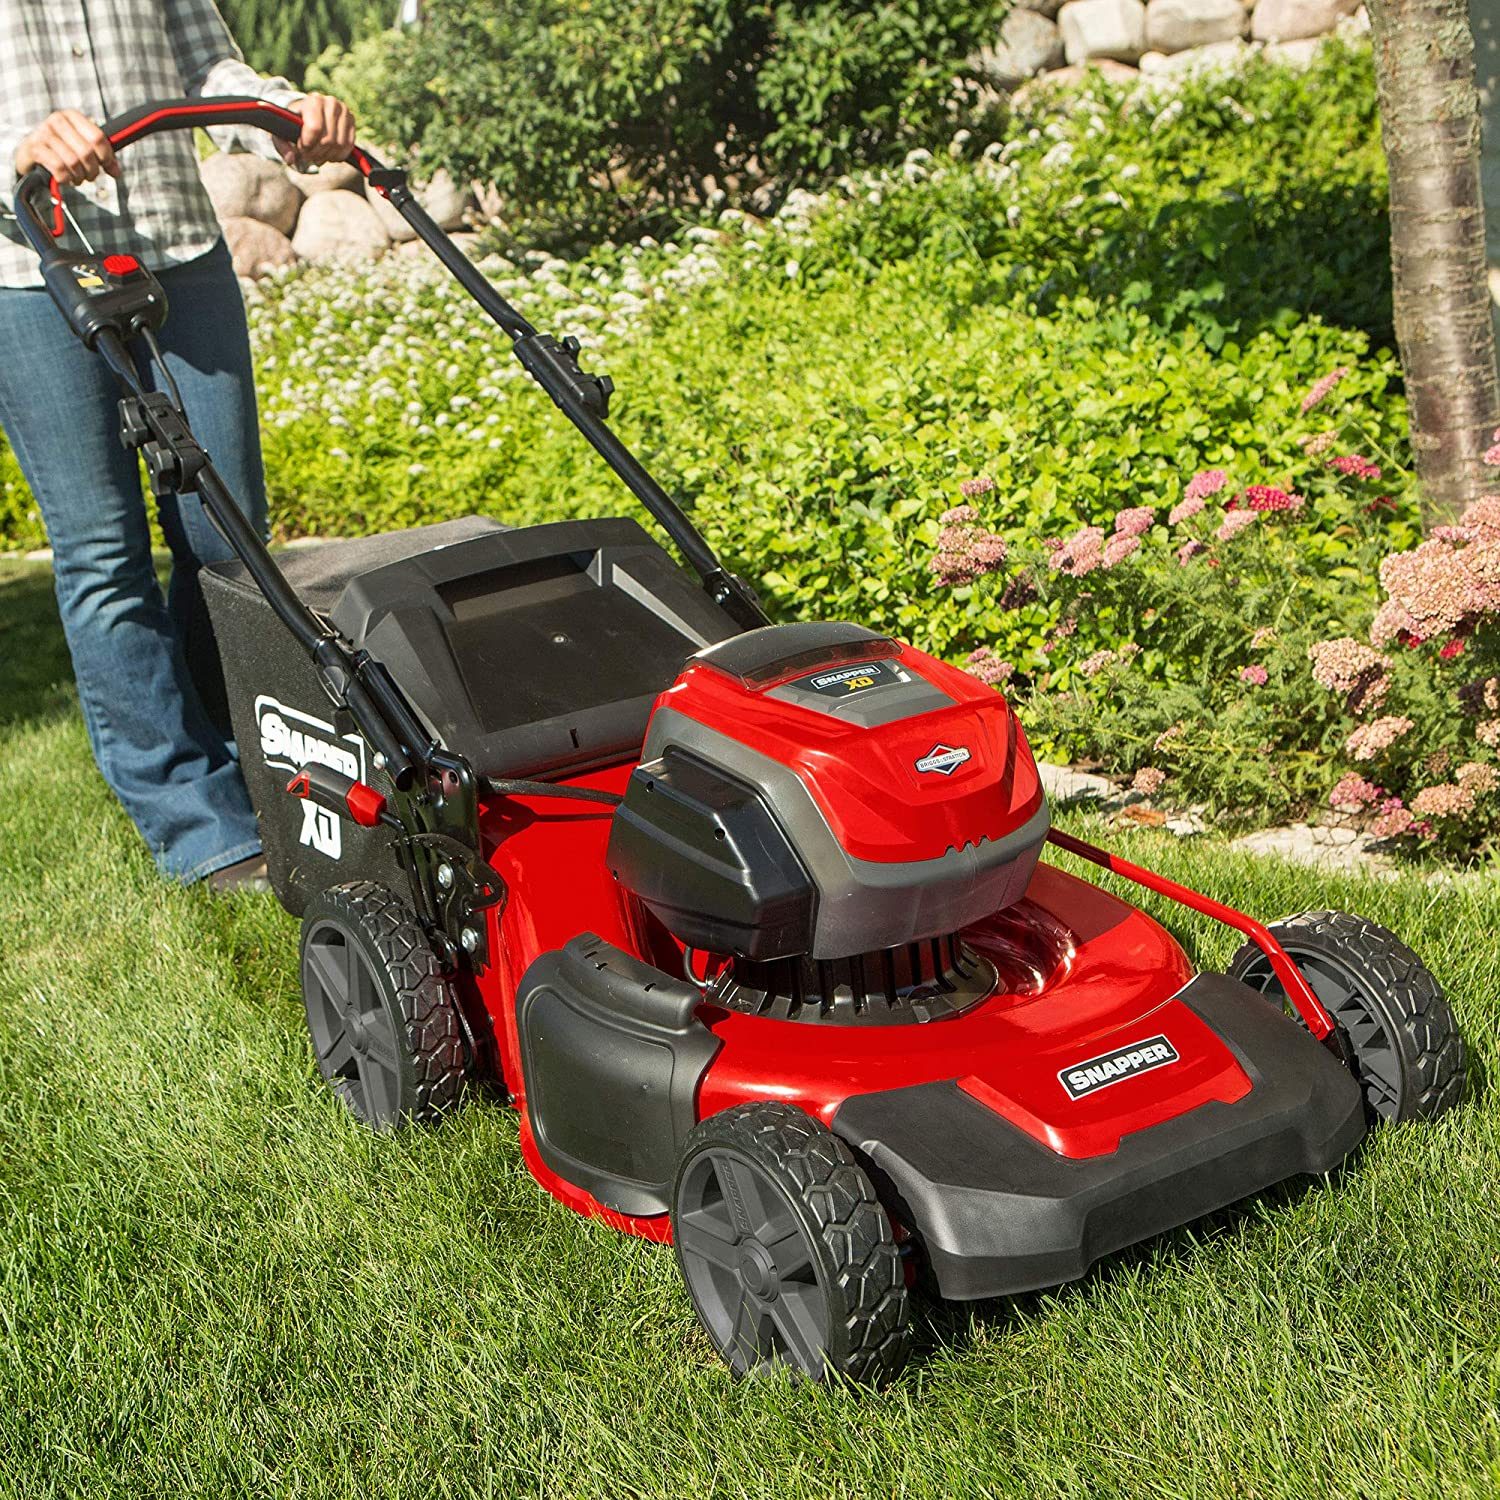 Get Ready for Spring with These Low Prices on Lawn Mowers